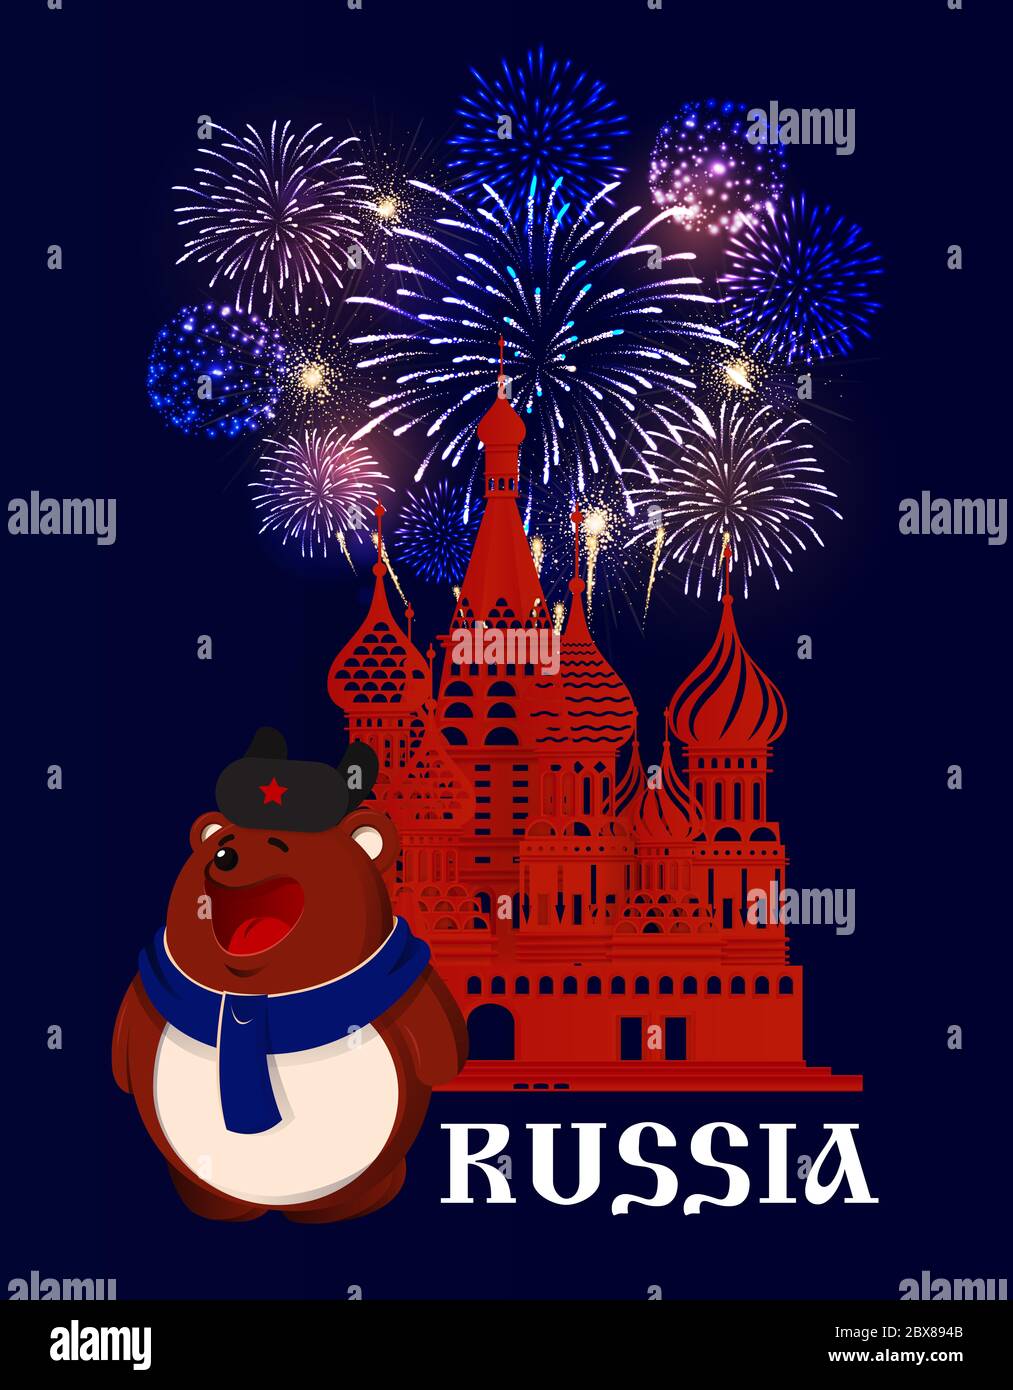 Russia. Brown bear in hat and scarf at Red Square in Moscow. Fireworks behind the St. Basil's Cathedral silhouette. Blue background Stock Photo